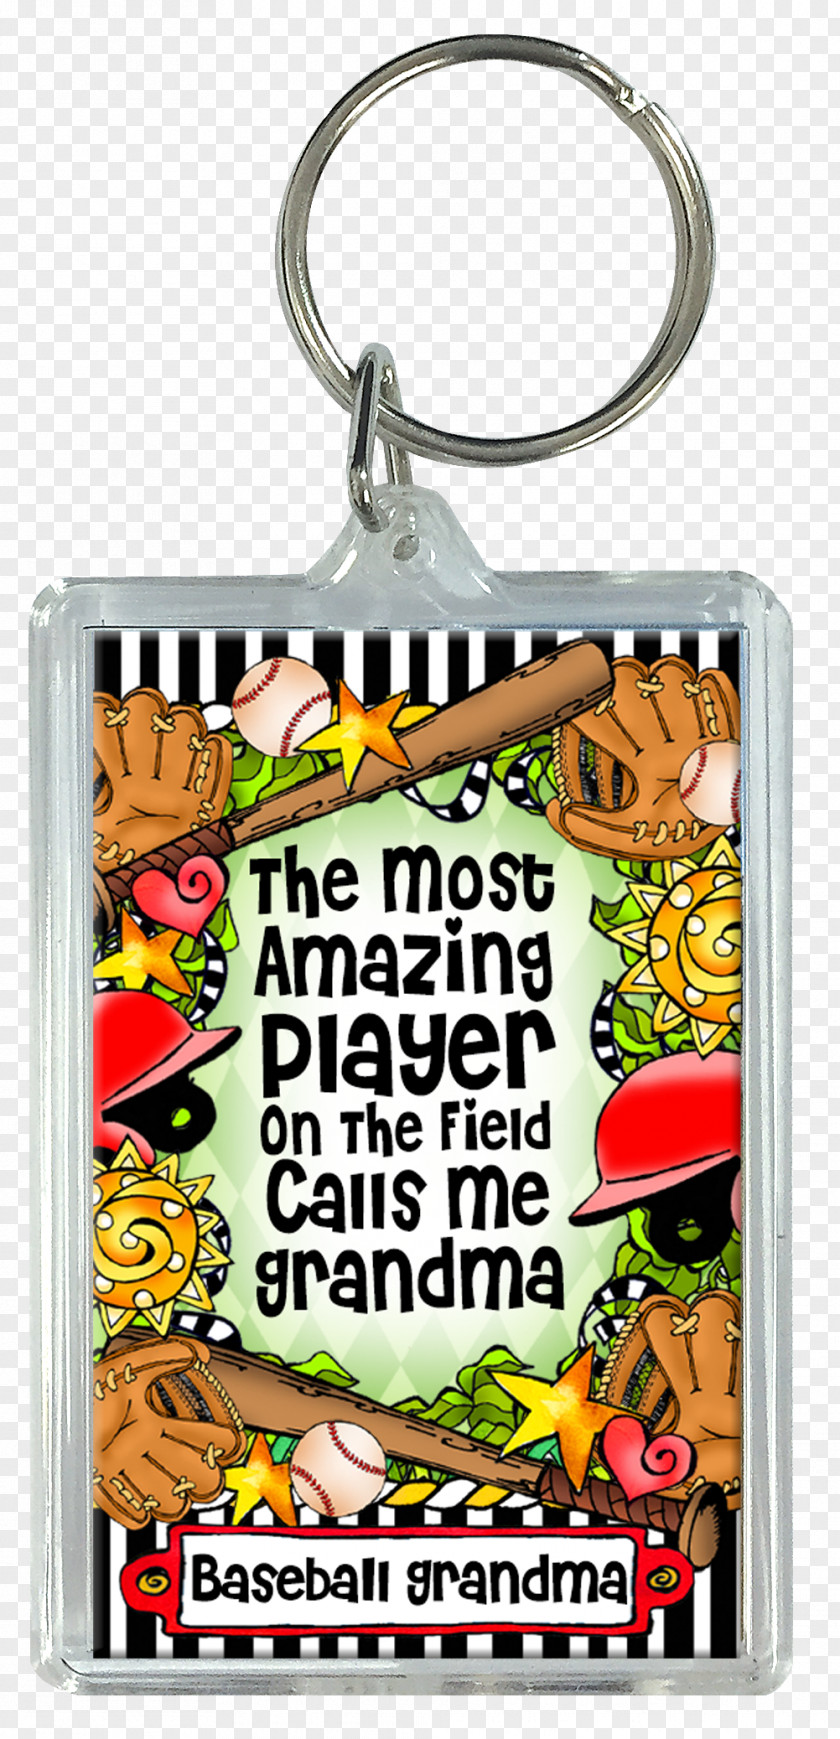 Grandmother Gifts Book Reading Text Image Key Chains PNG